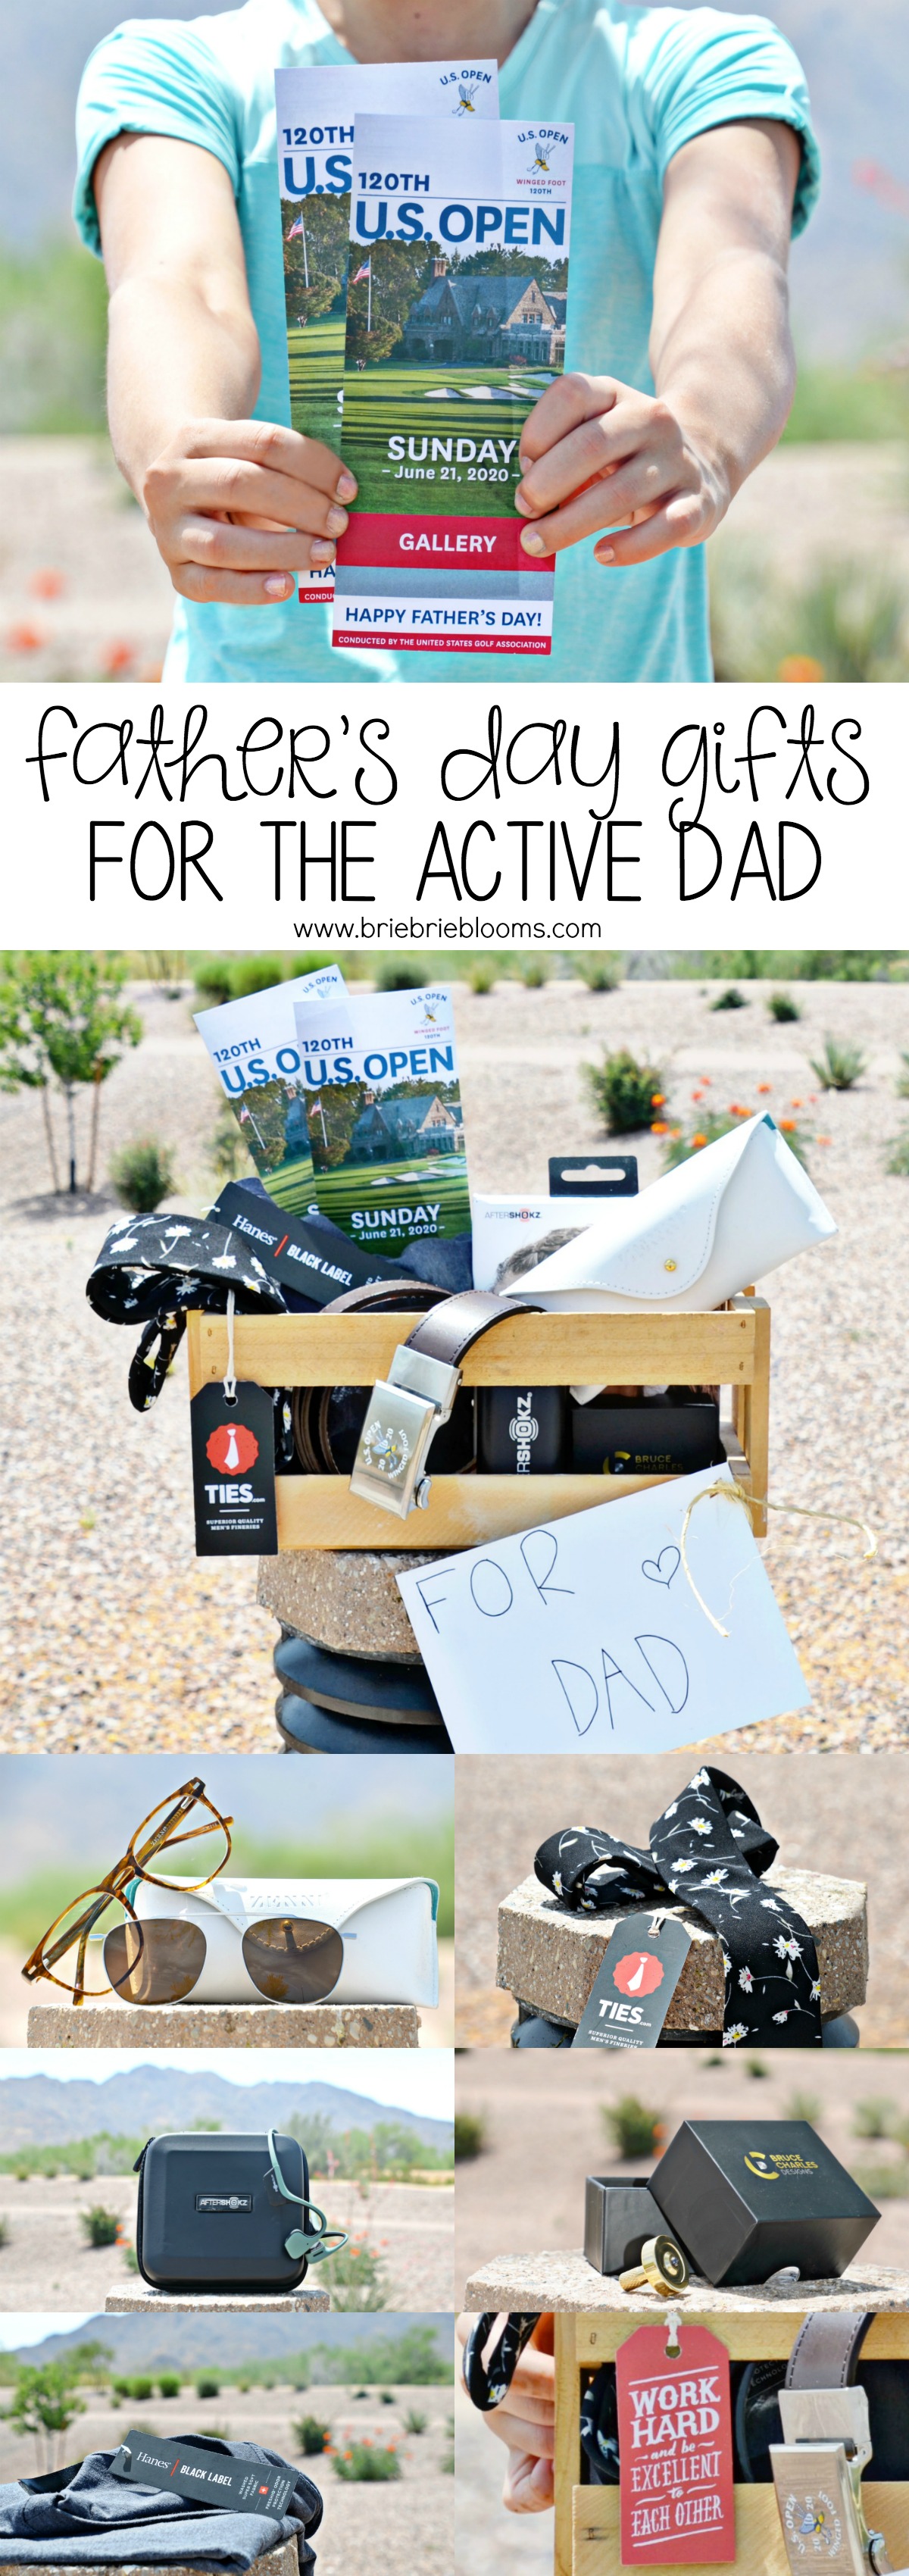 These Father's Day Gifts for the Active Dad are awesome!